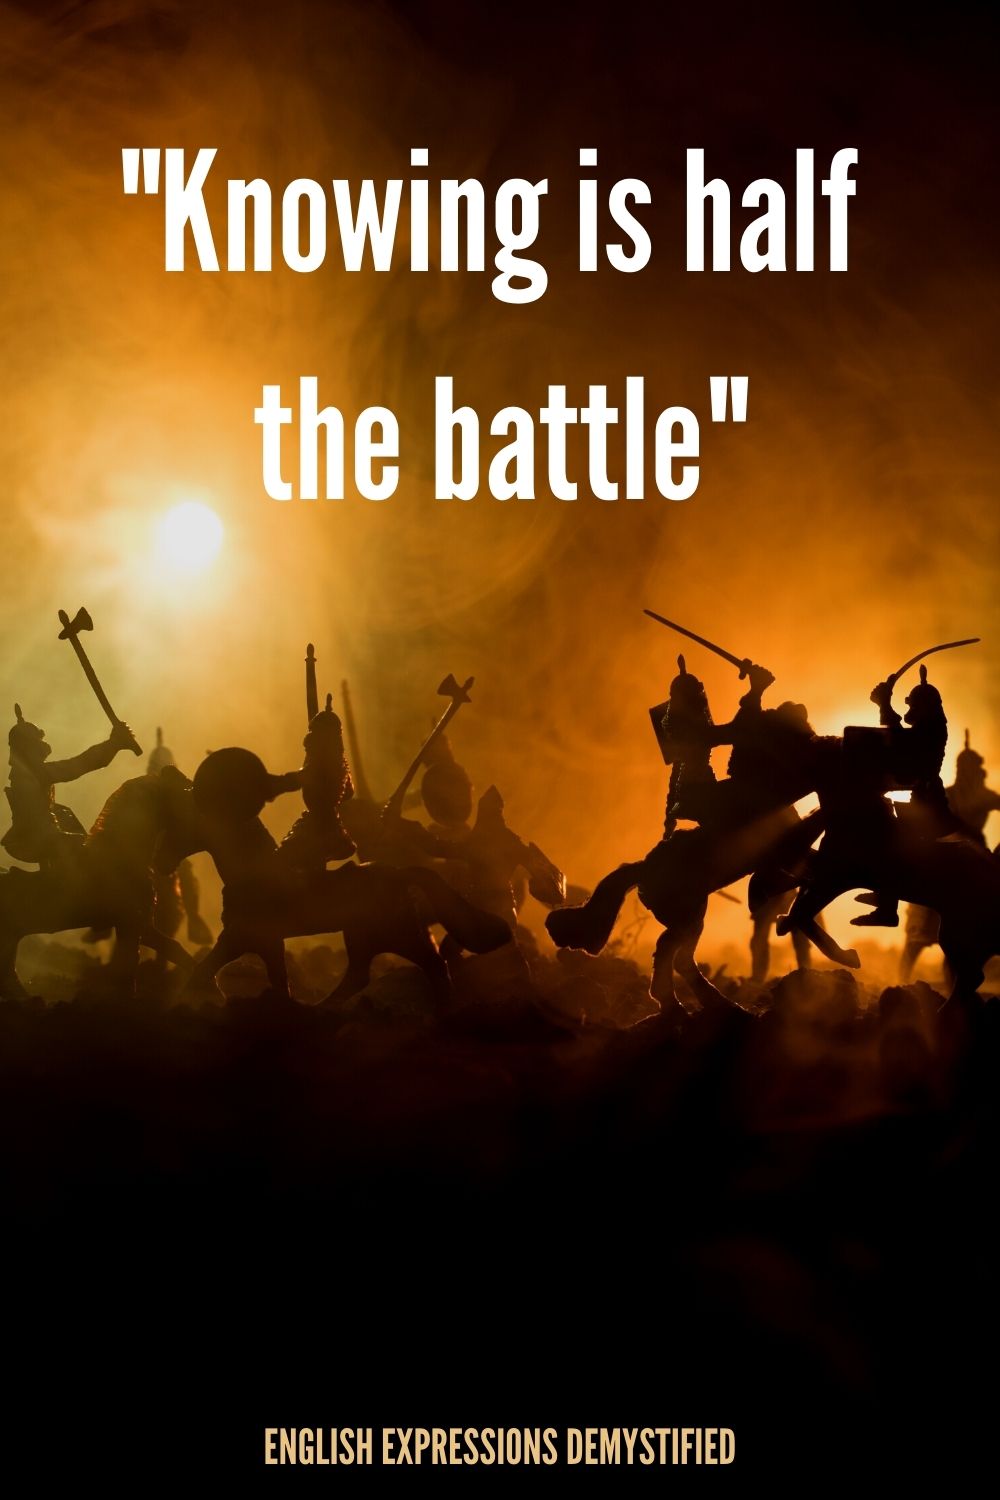 Knowing is half the battle Meaning